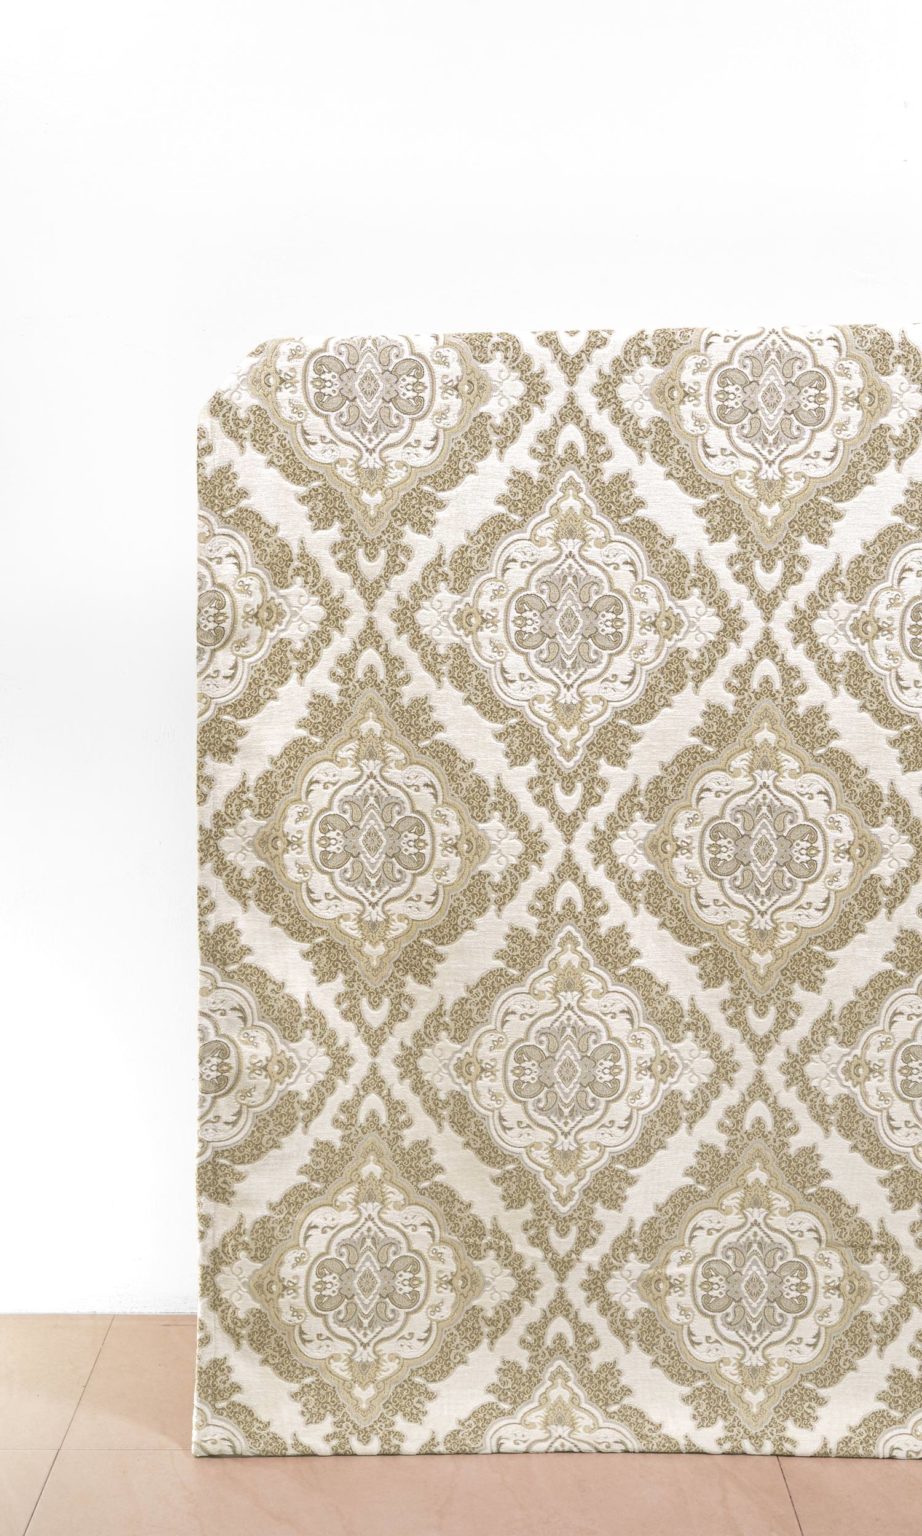 'Parchment Ivory' Custom Window Fabric Sample (White/ Beige/ Brown)